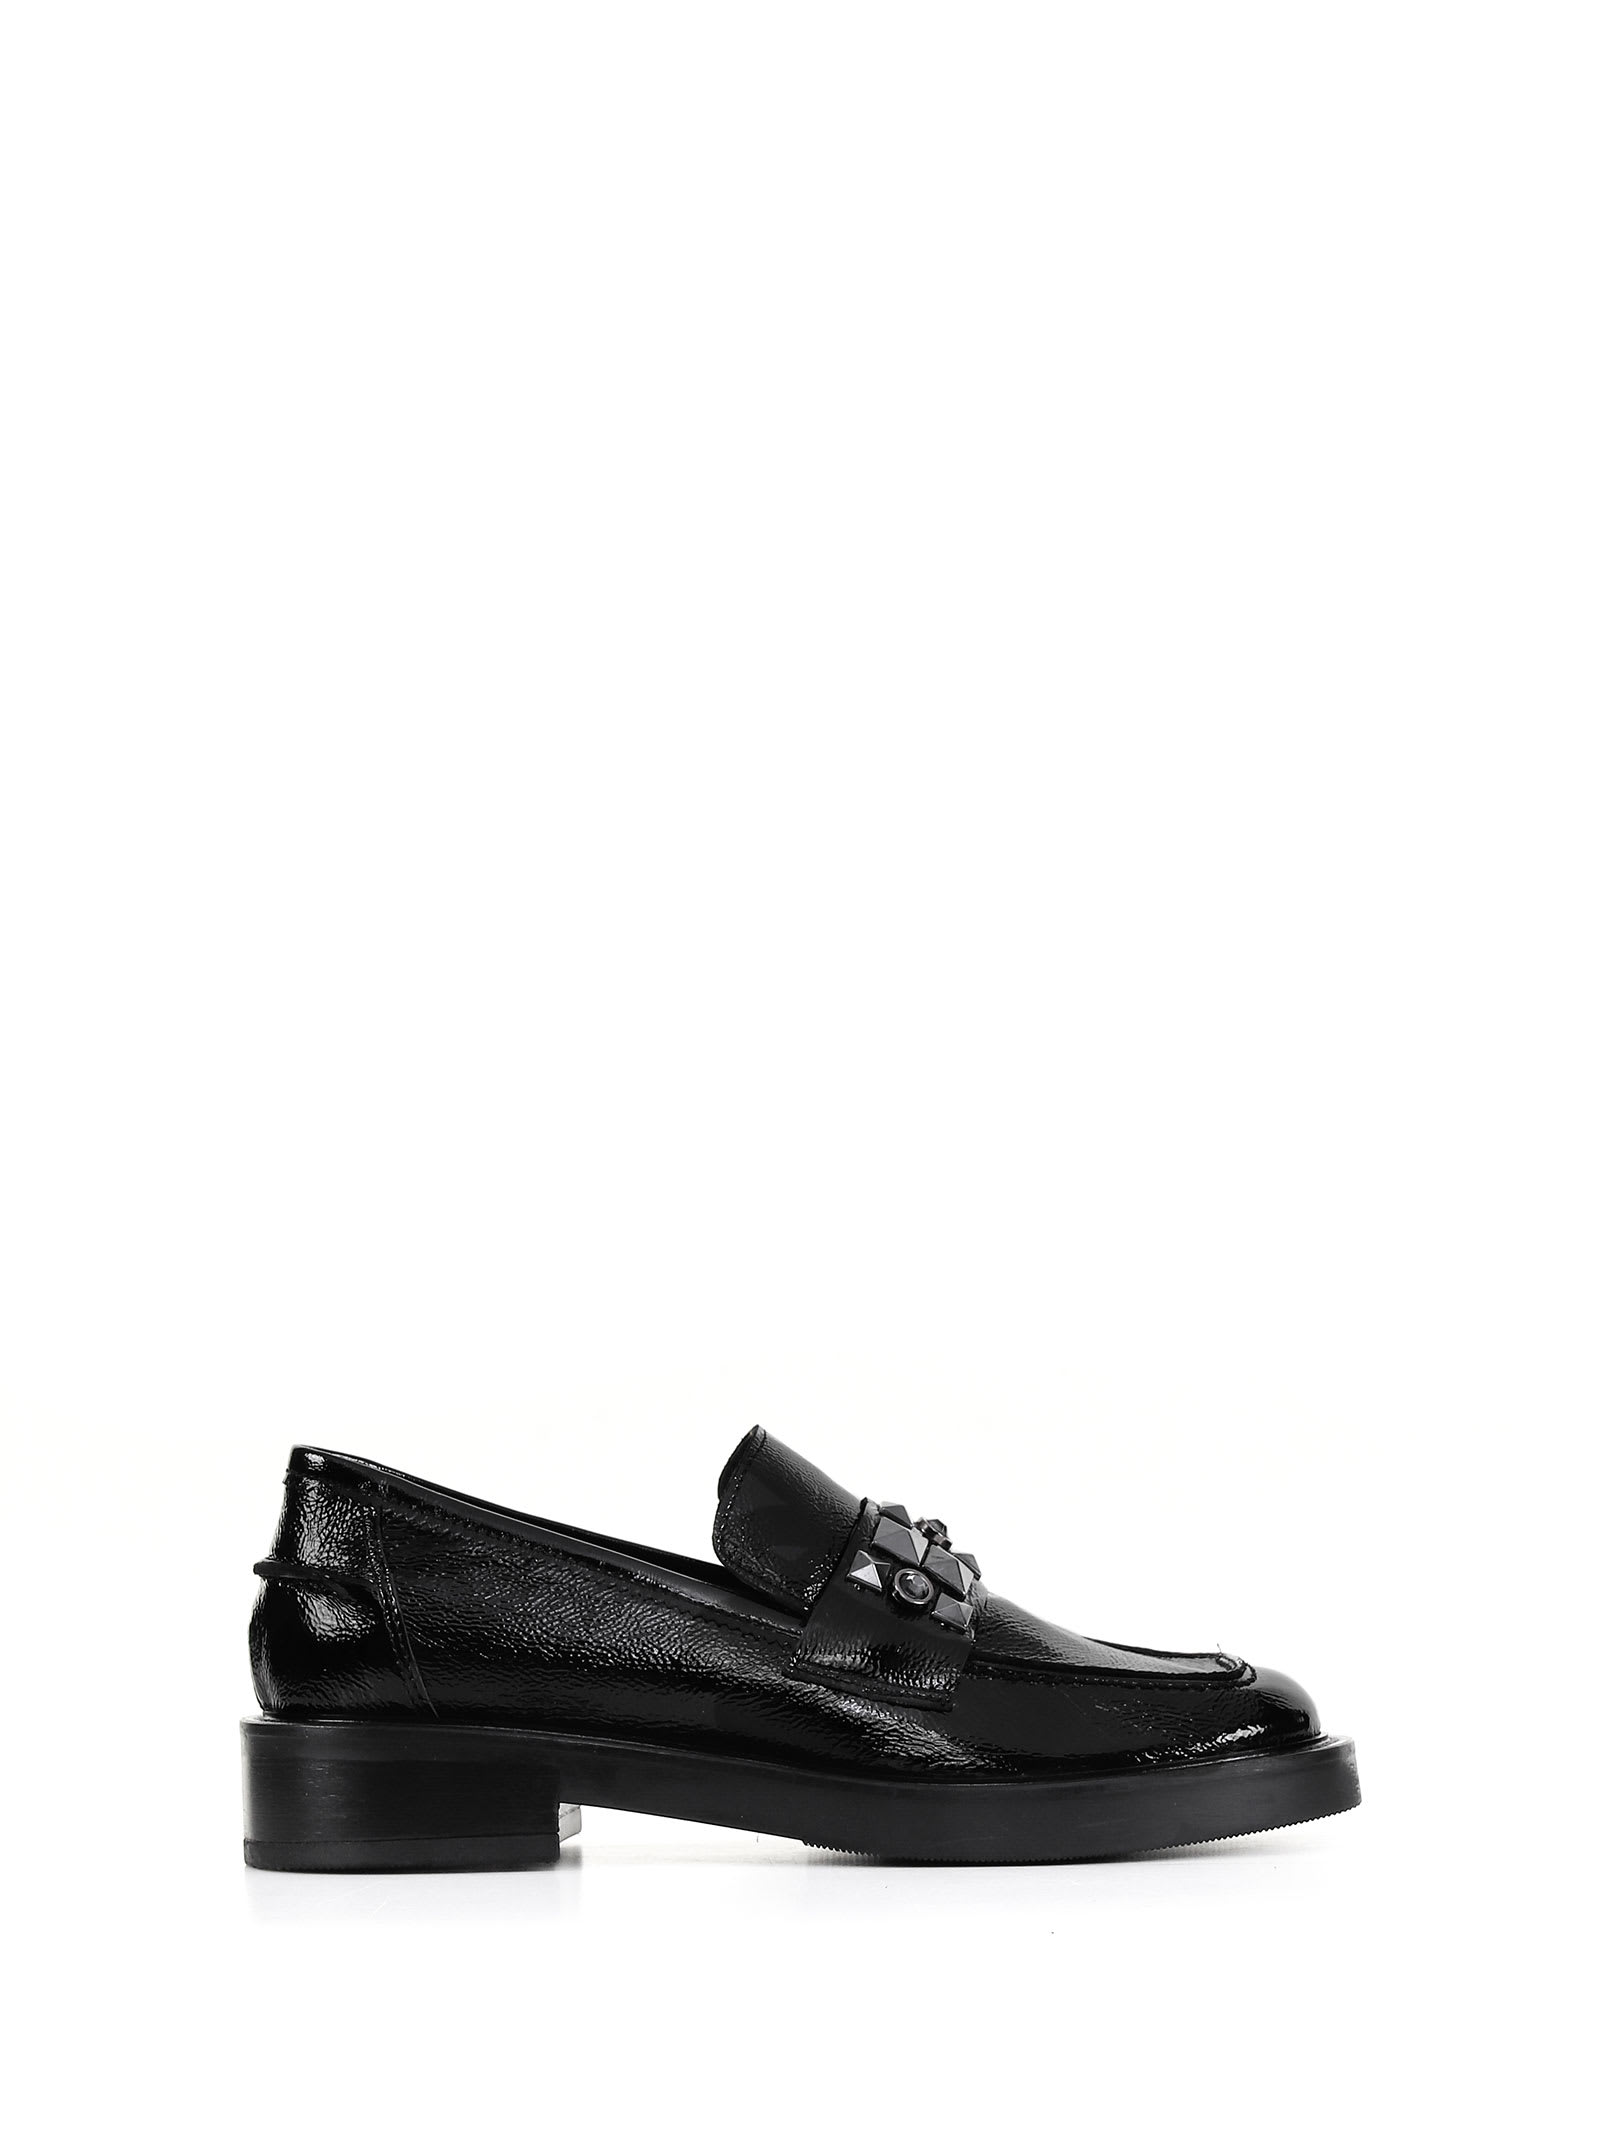 Janet & Janet Naplack Patent Leather Loafers